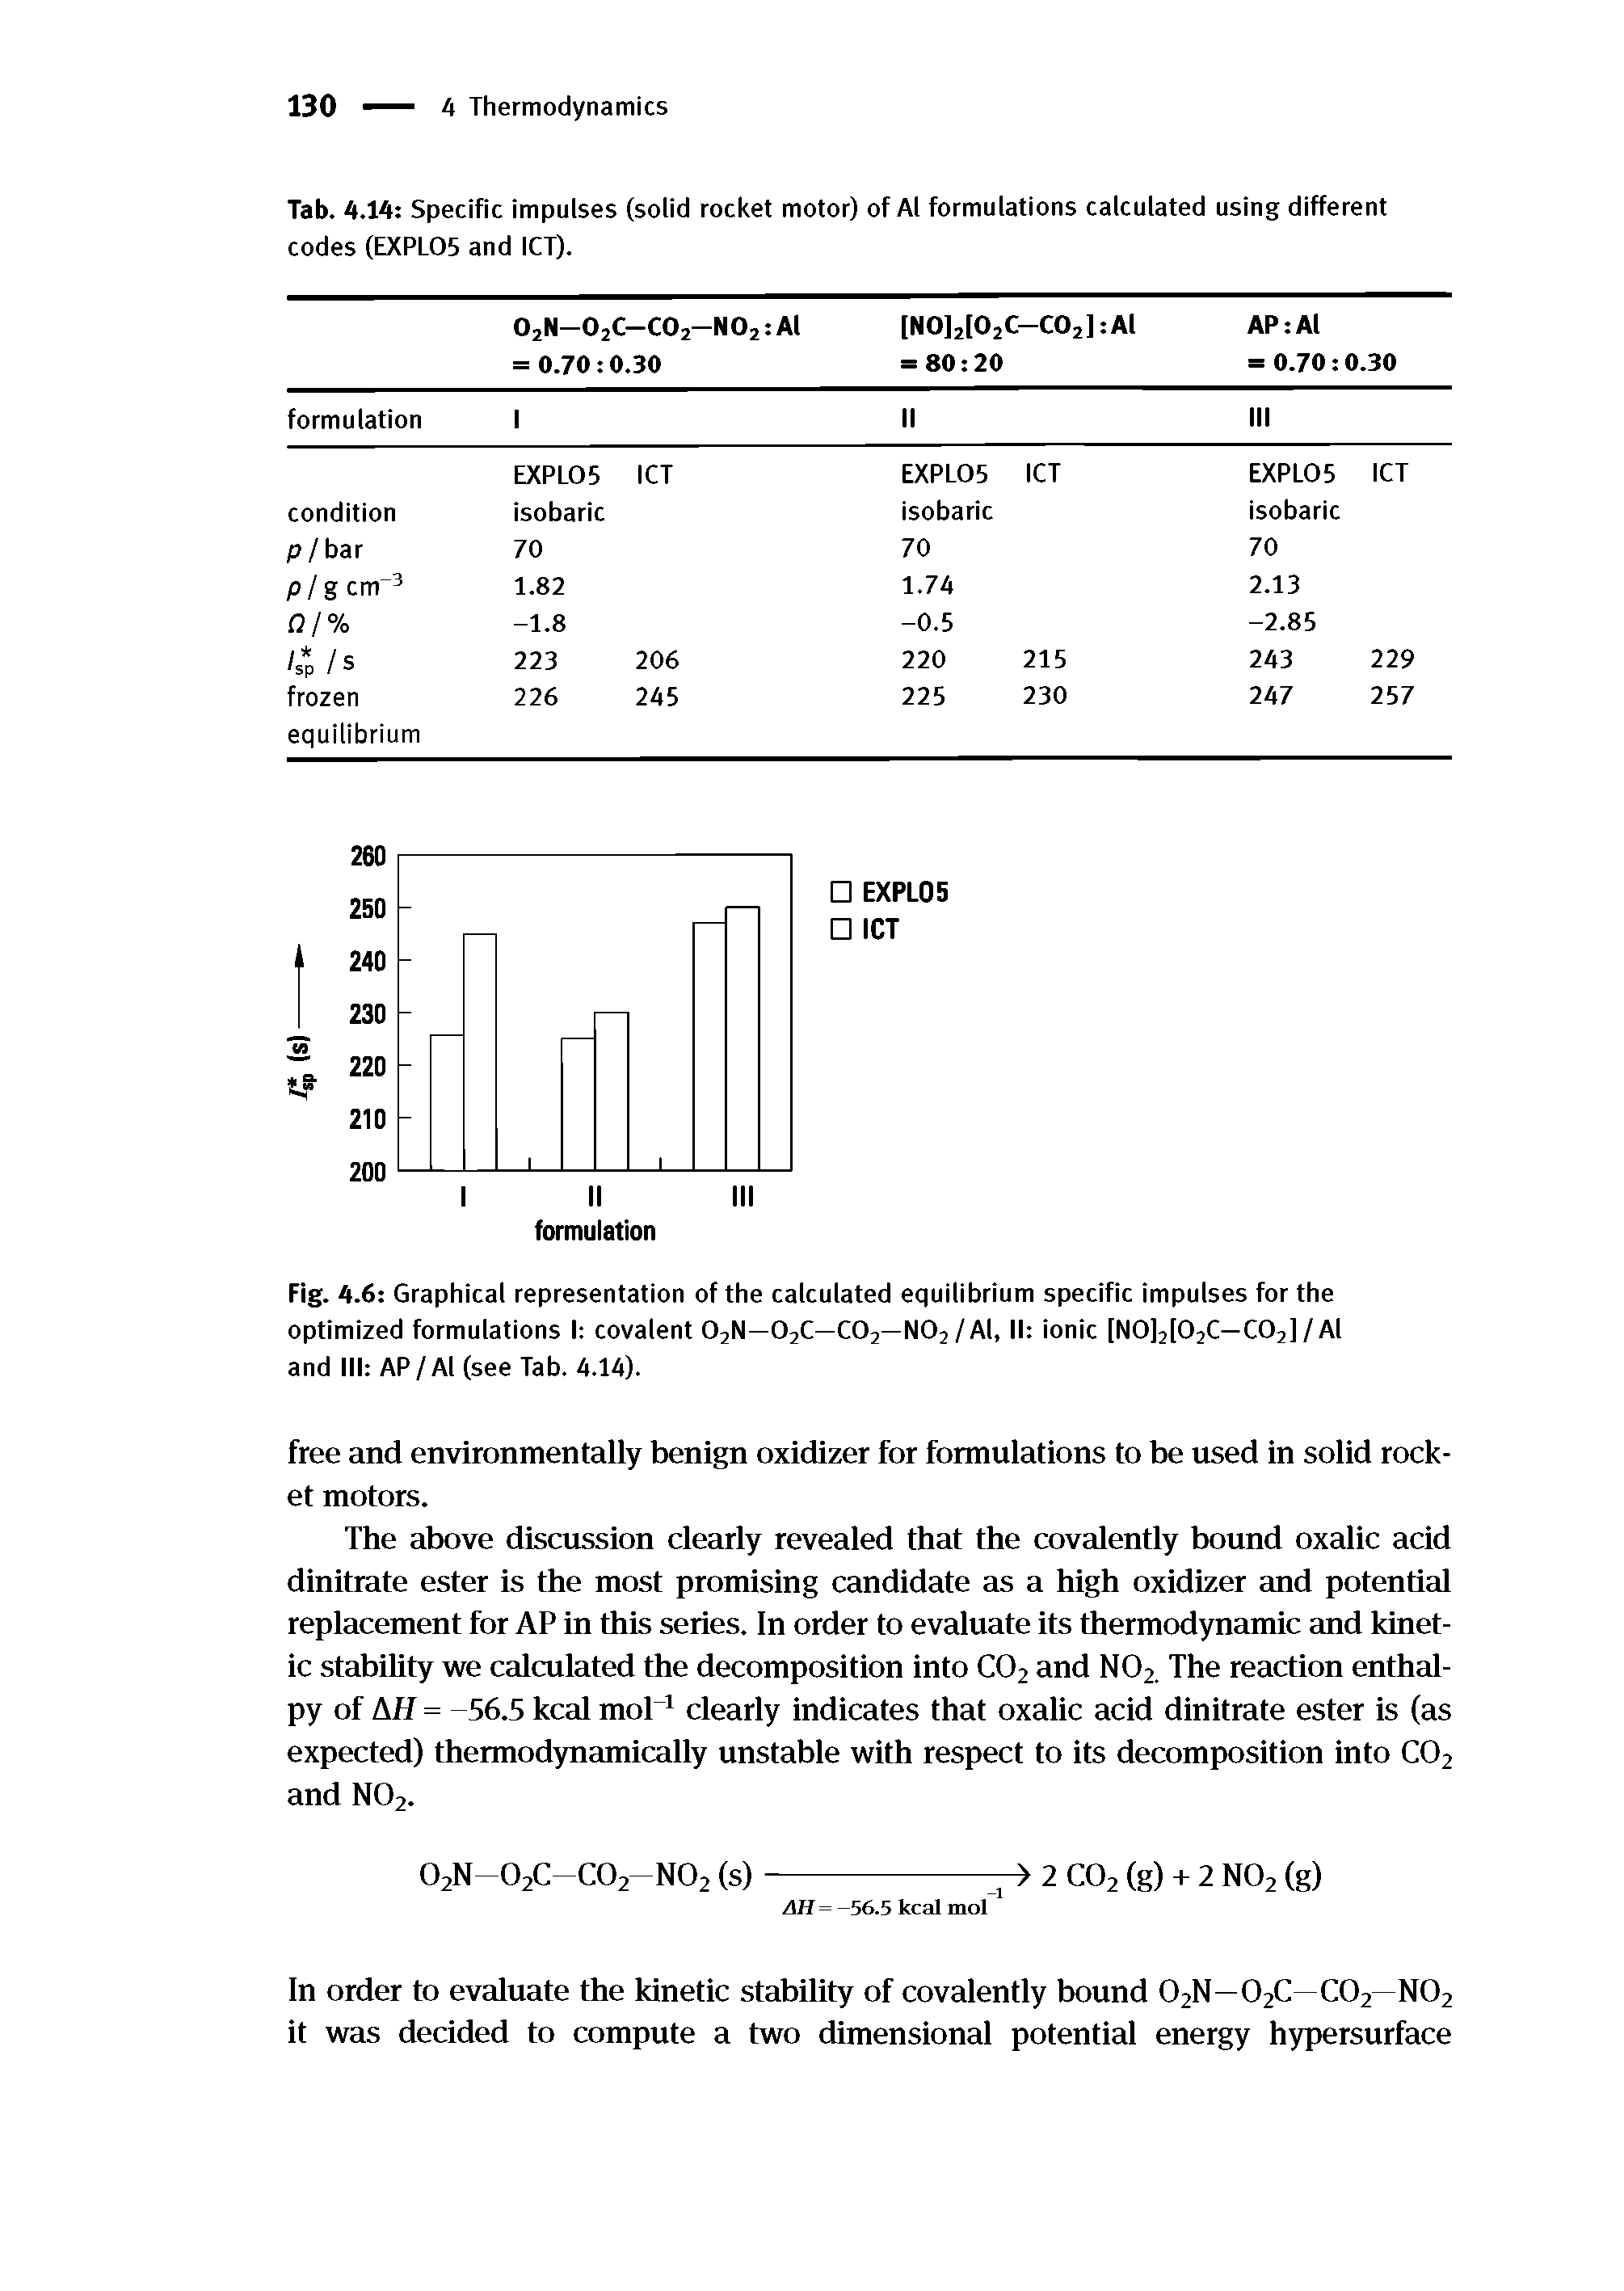 Tab. 4.14 Specific impulses (solid rocket motor) of Al formulations calculated using different codes (EXPL05 and ICT).